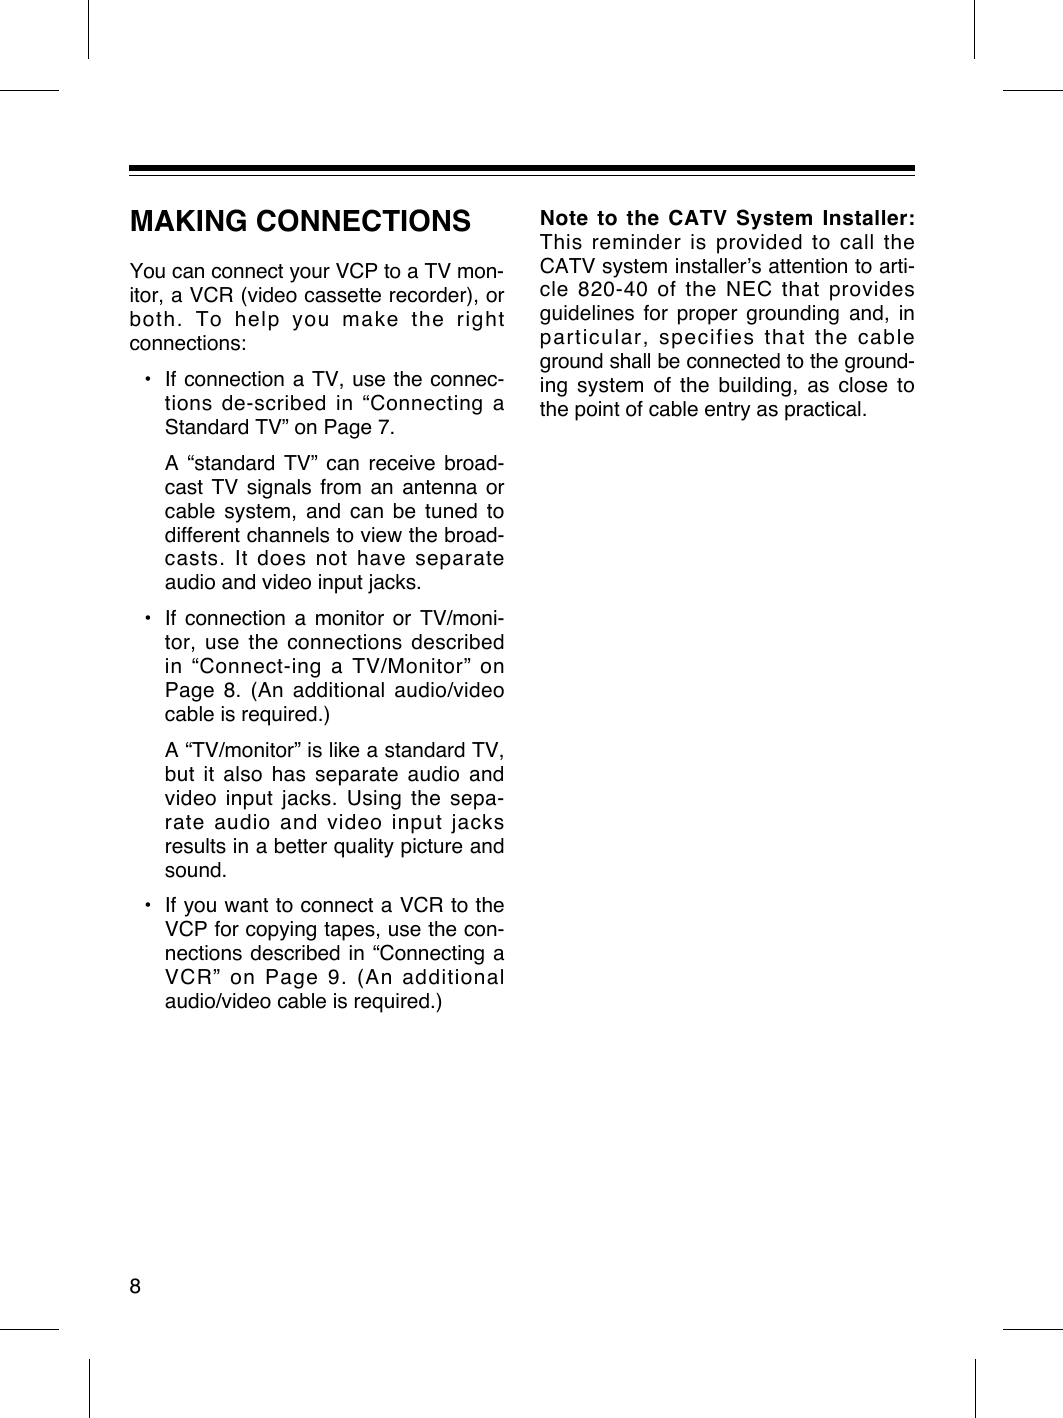 MAKING CONNECTIONSYou can connect your VCP to a TV mon-itor, a VCR (video cassette recorder), orboth. To help you make the rightconnections:¥ If connection a TV, use the connec-tions de-scribed in ÒConnecting aStandard TVÓ on Page 7.A Òstandard TVÓ can receive broad-cast TV signals from an antenna orcable system, and can be tuned todifferent channels to view the broad-casts. It does not have separateaudio and video input jacks.¥ If connection a monitor or TV/moni-tor, use the connections described in ÒConnect-ing a TV/MonitorÓ onPage 8. (An additional audio/videocable is required.)A ÒTV/monitorÓ is like a standard TV,but it also has separate audio andvideo input jacks. Using the sepa-rate audio and video input jacksresults in a better quality picture andsound.¥ If you want to connect a VCR to theVCP for copying tapes, use the con-nections described in ÒConnecting aVCRÓ on Page 9. (An additionalaudio/video cable is required.)Note to the CATV System Installer:This reminder is provided to call theCATV system installerÕs attention to arti-cle 820-40 of the NEC that providesguidelines for proper grounding and, inparticular, specifies that the cableground shall be connected to the ground-ing system of the building, as close tothe point of cable entry as practical.8